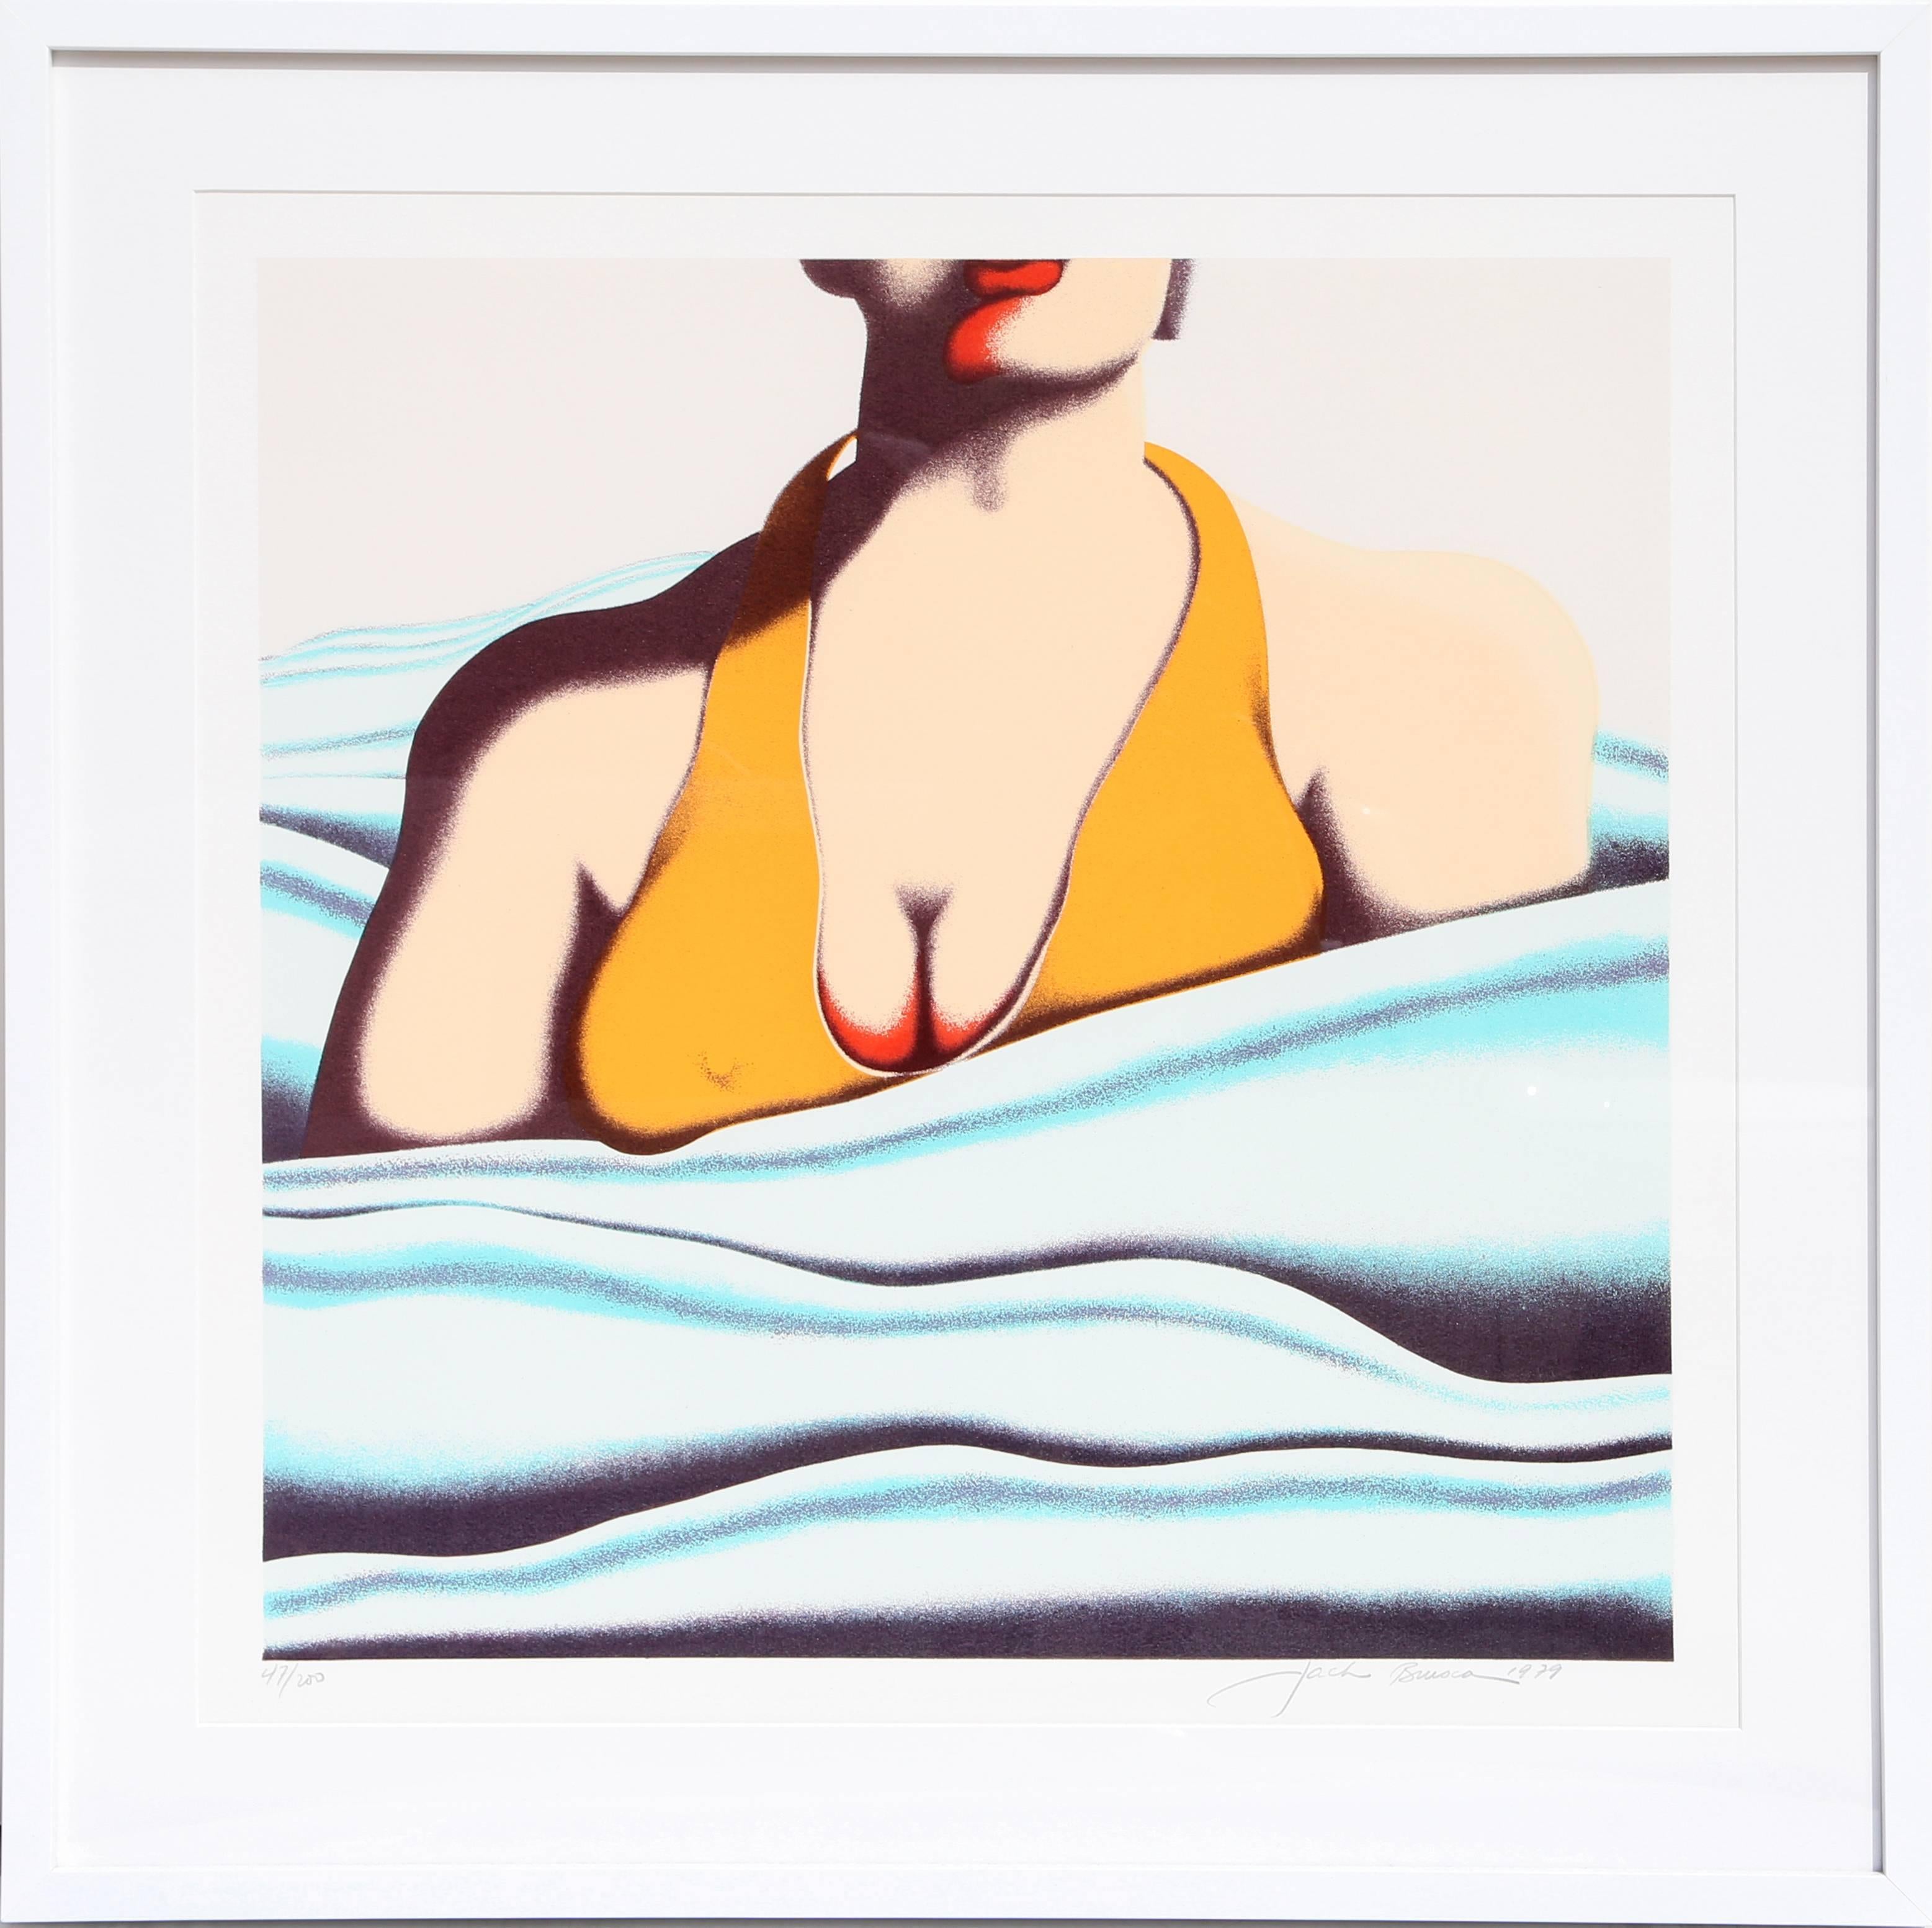 Artist: Jack Brusca, American (1939 - 1993)
Title: The Beach
Year: 1979
Medium: Serigraph, signed and numbered in pencil
Edition: 200, AP 30
Image Size: 23 x 23 inches
Size: 27.5 in. x 26 in. (69.85 cm x 66.04 cm)
Frame: 32 x 32 inches